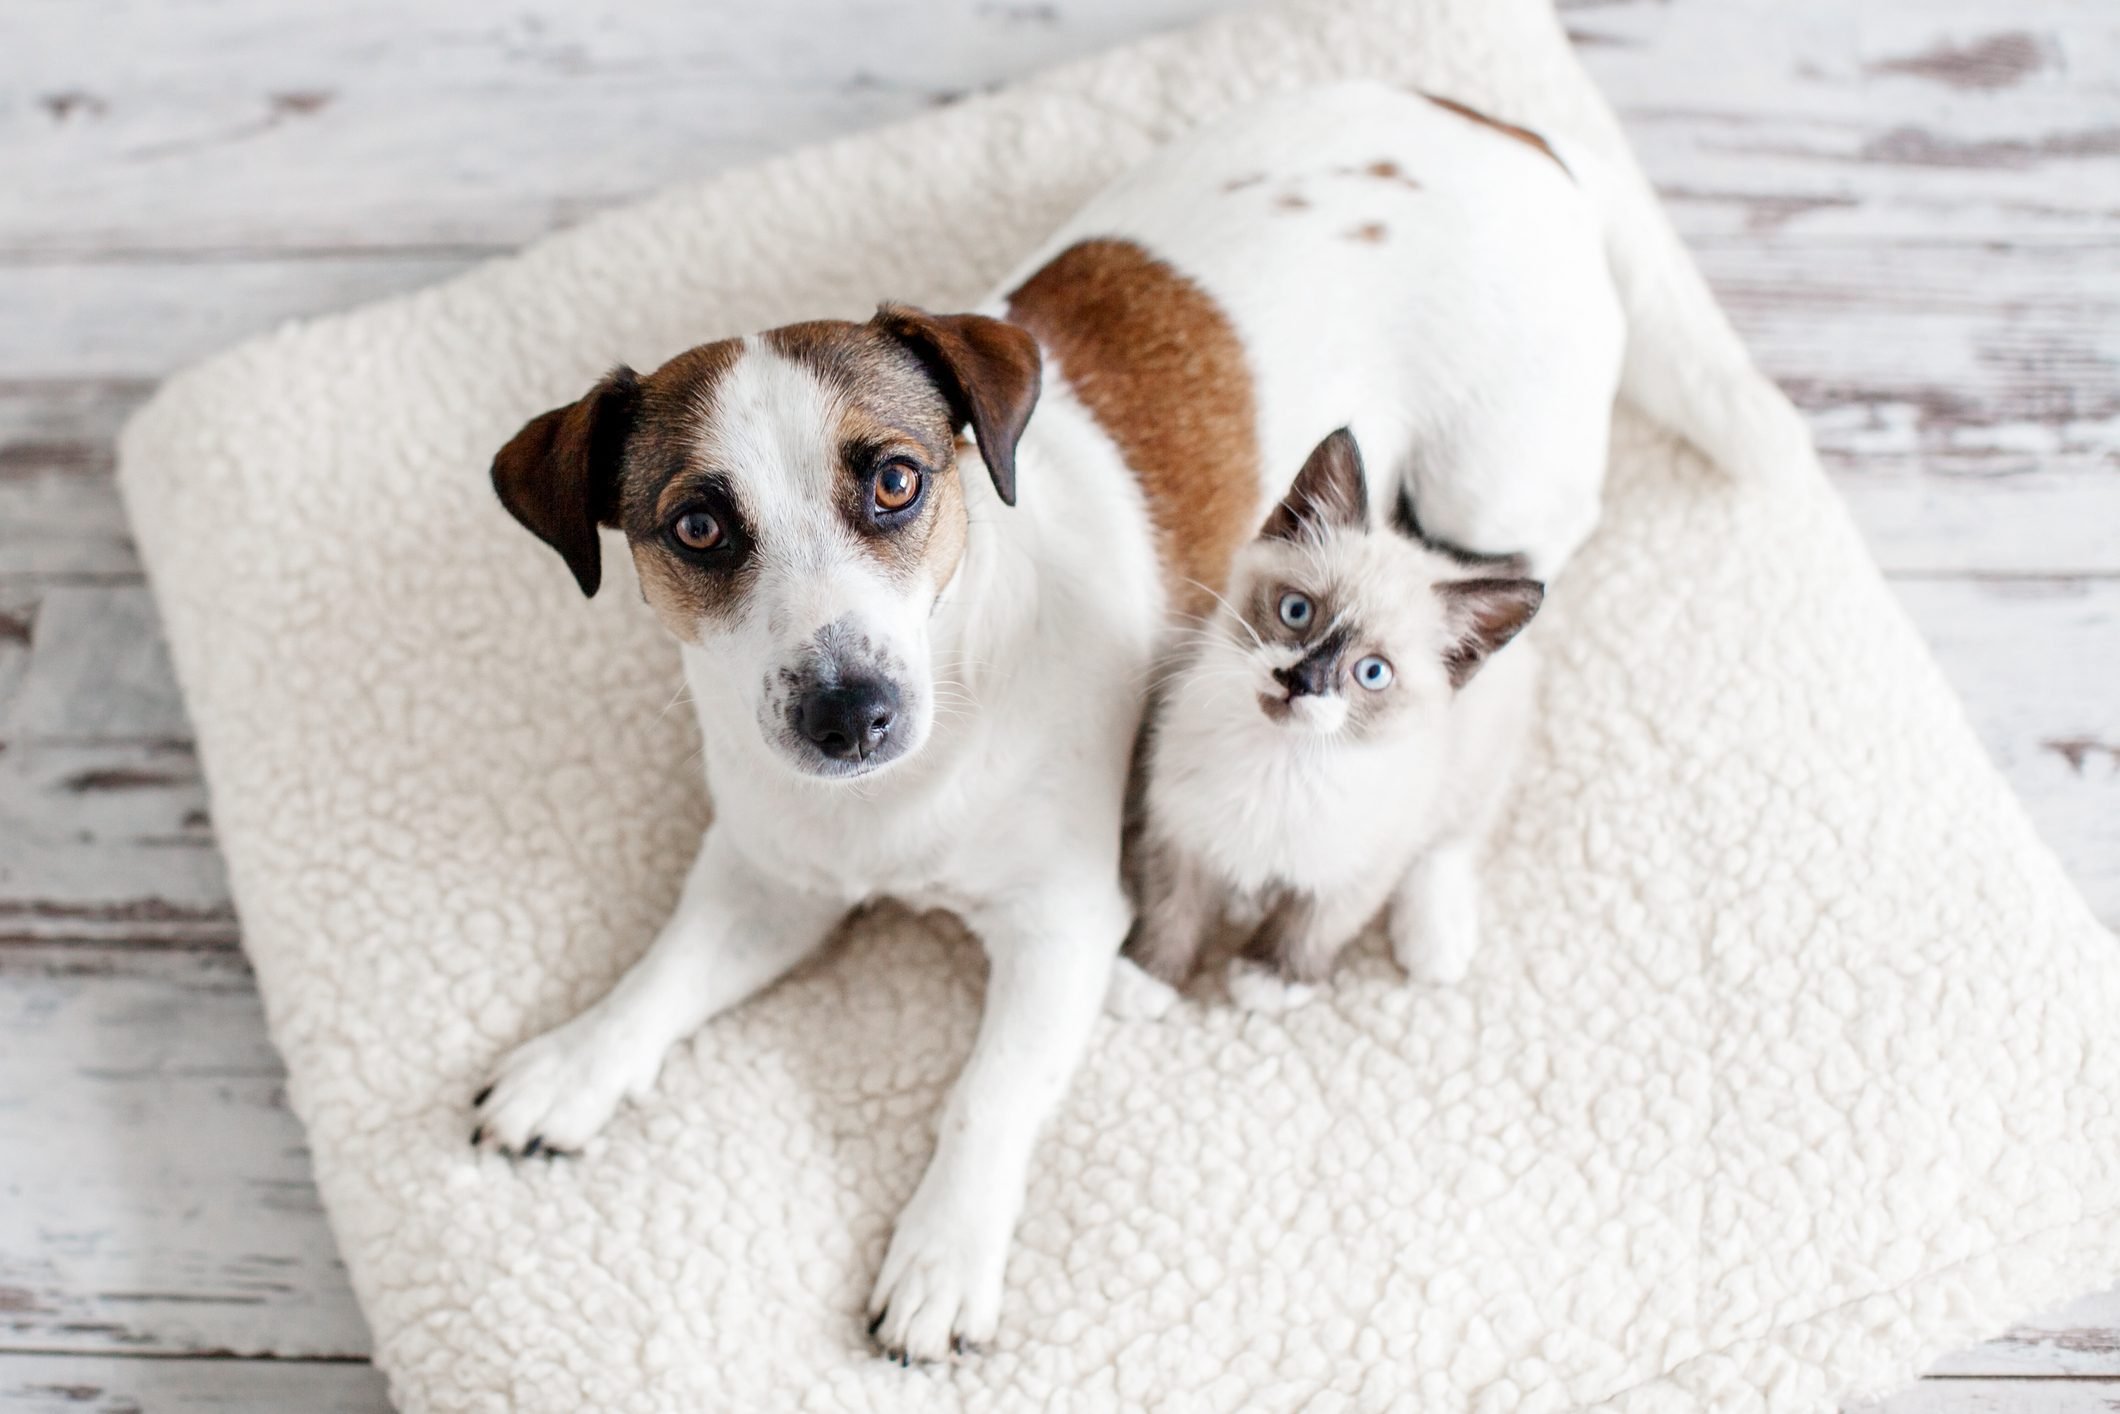 Pet Odor Removal: 10 Easiest Ways to Get Rid of Pet Odors